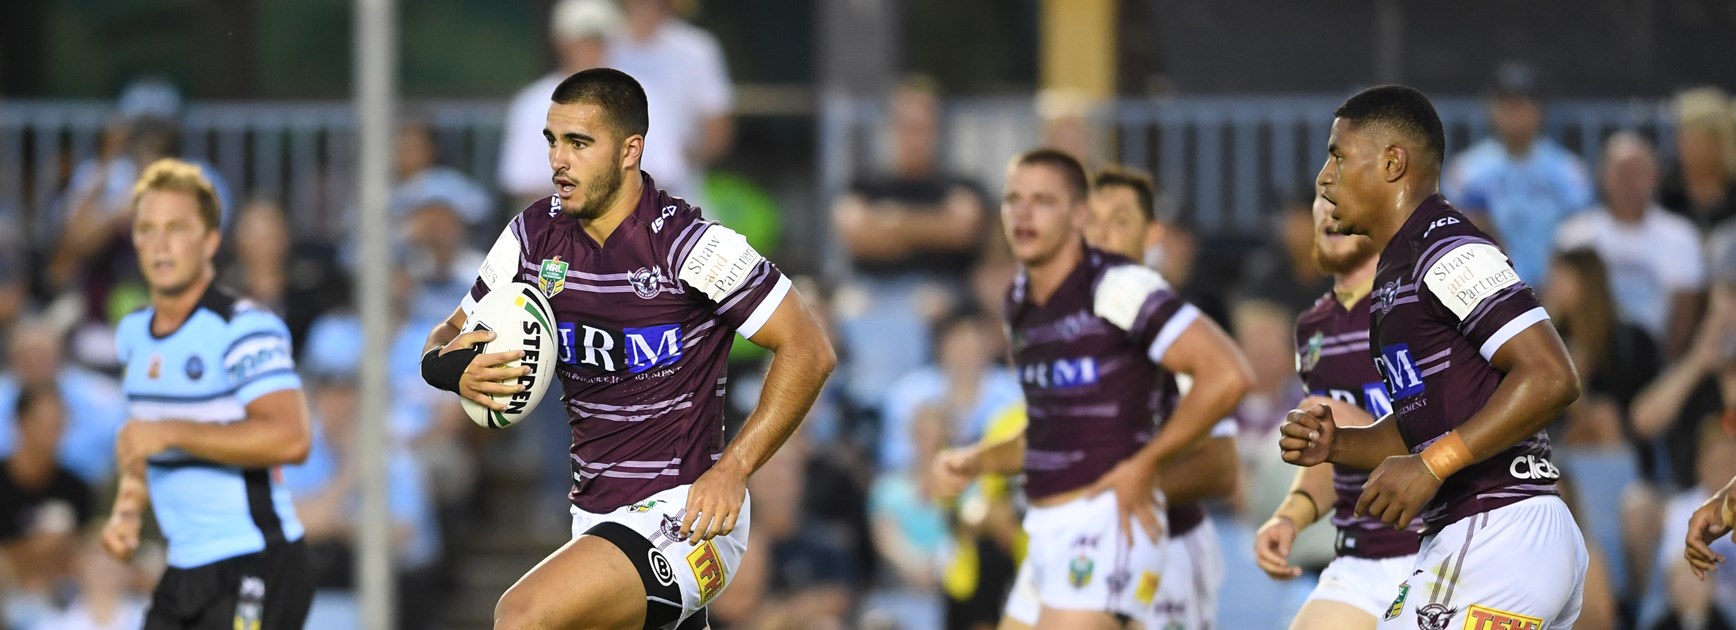 Sea Eagles go down in opening trial